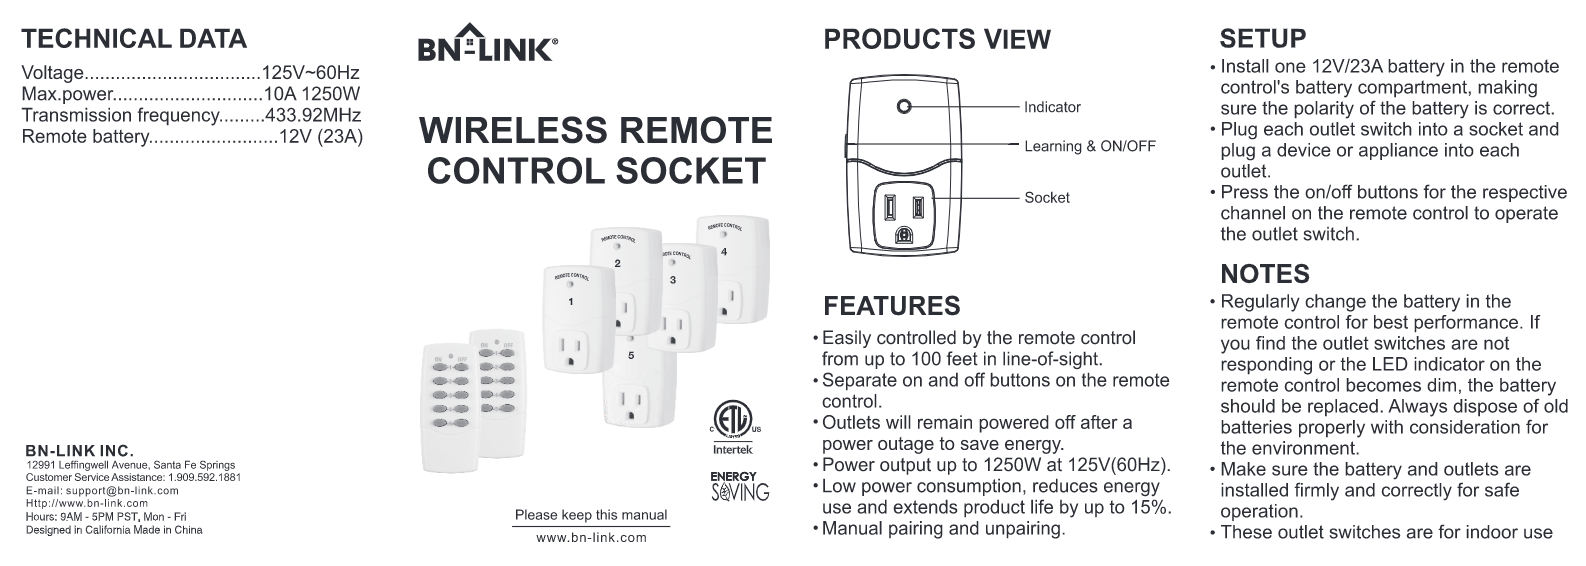 BN-LINK U57R Outdoor Wireless Remote Control Outlet Instruction Manual